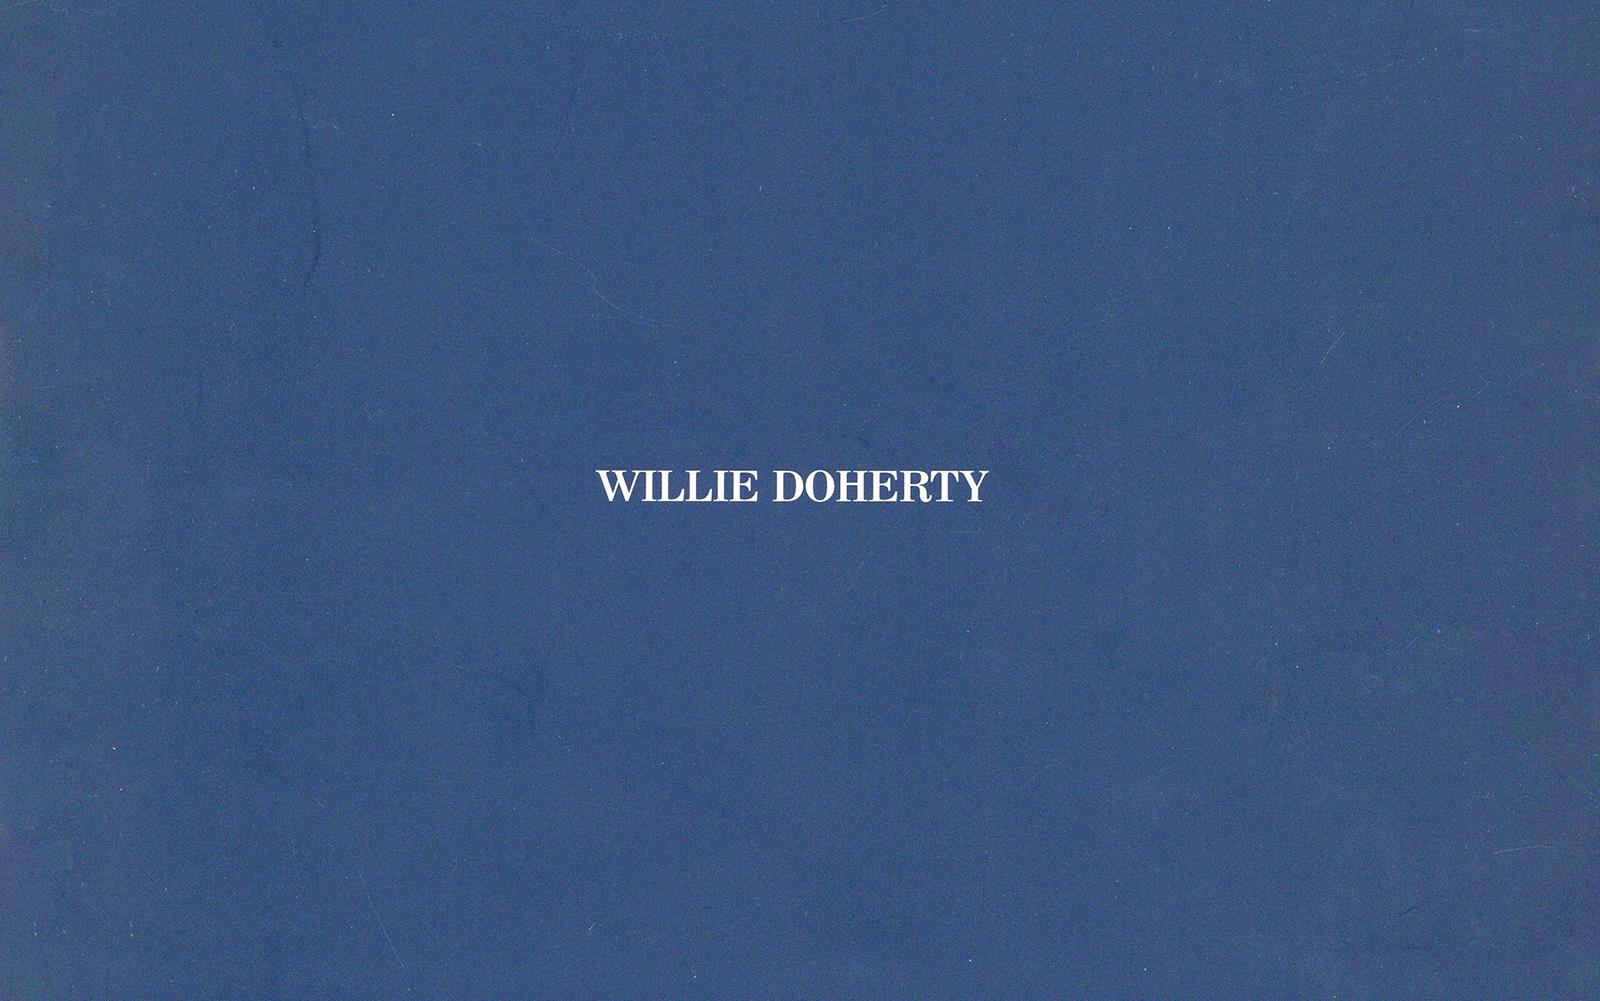 FC_1996_Willie_doherty_WilliE_Doherty_FT766